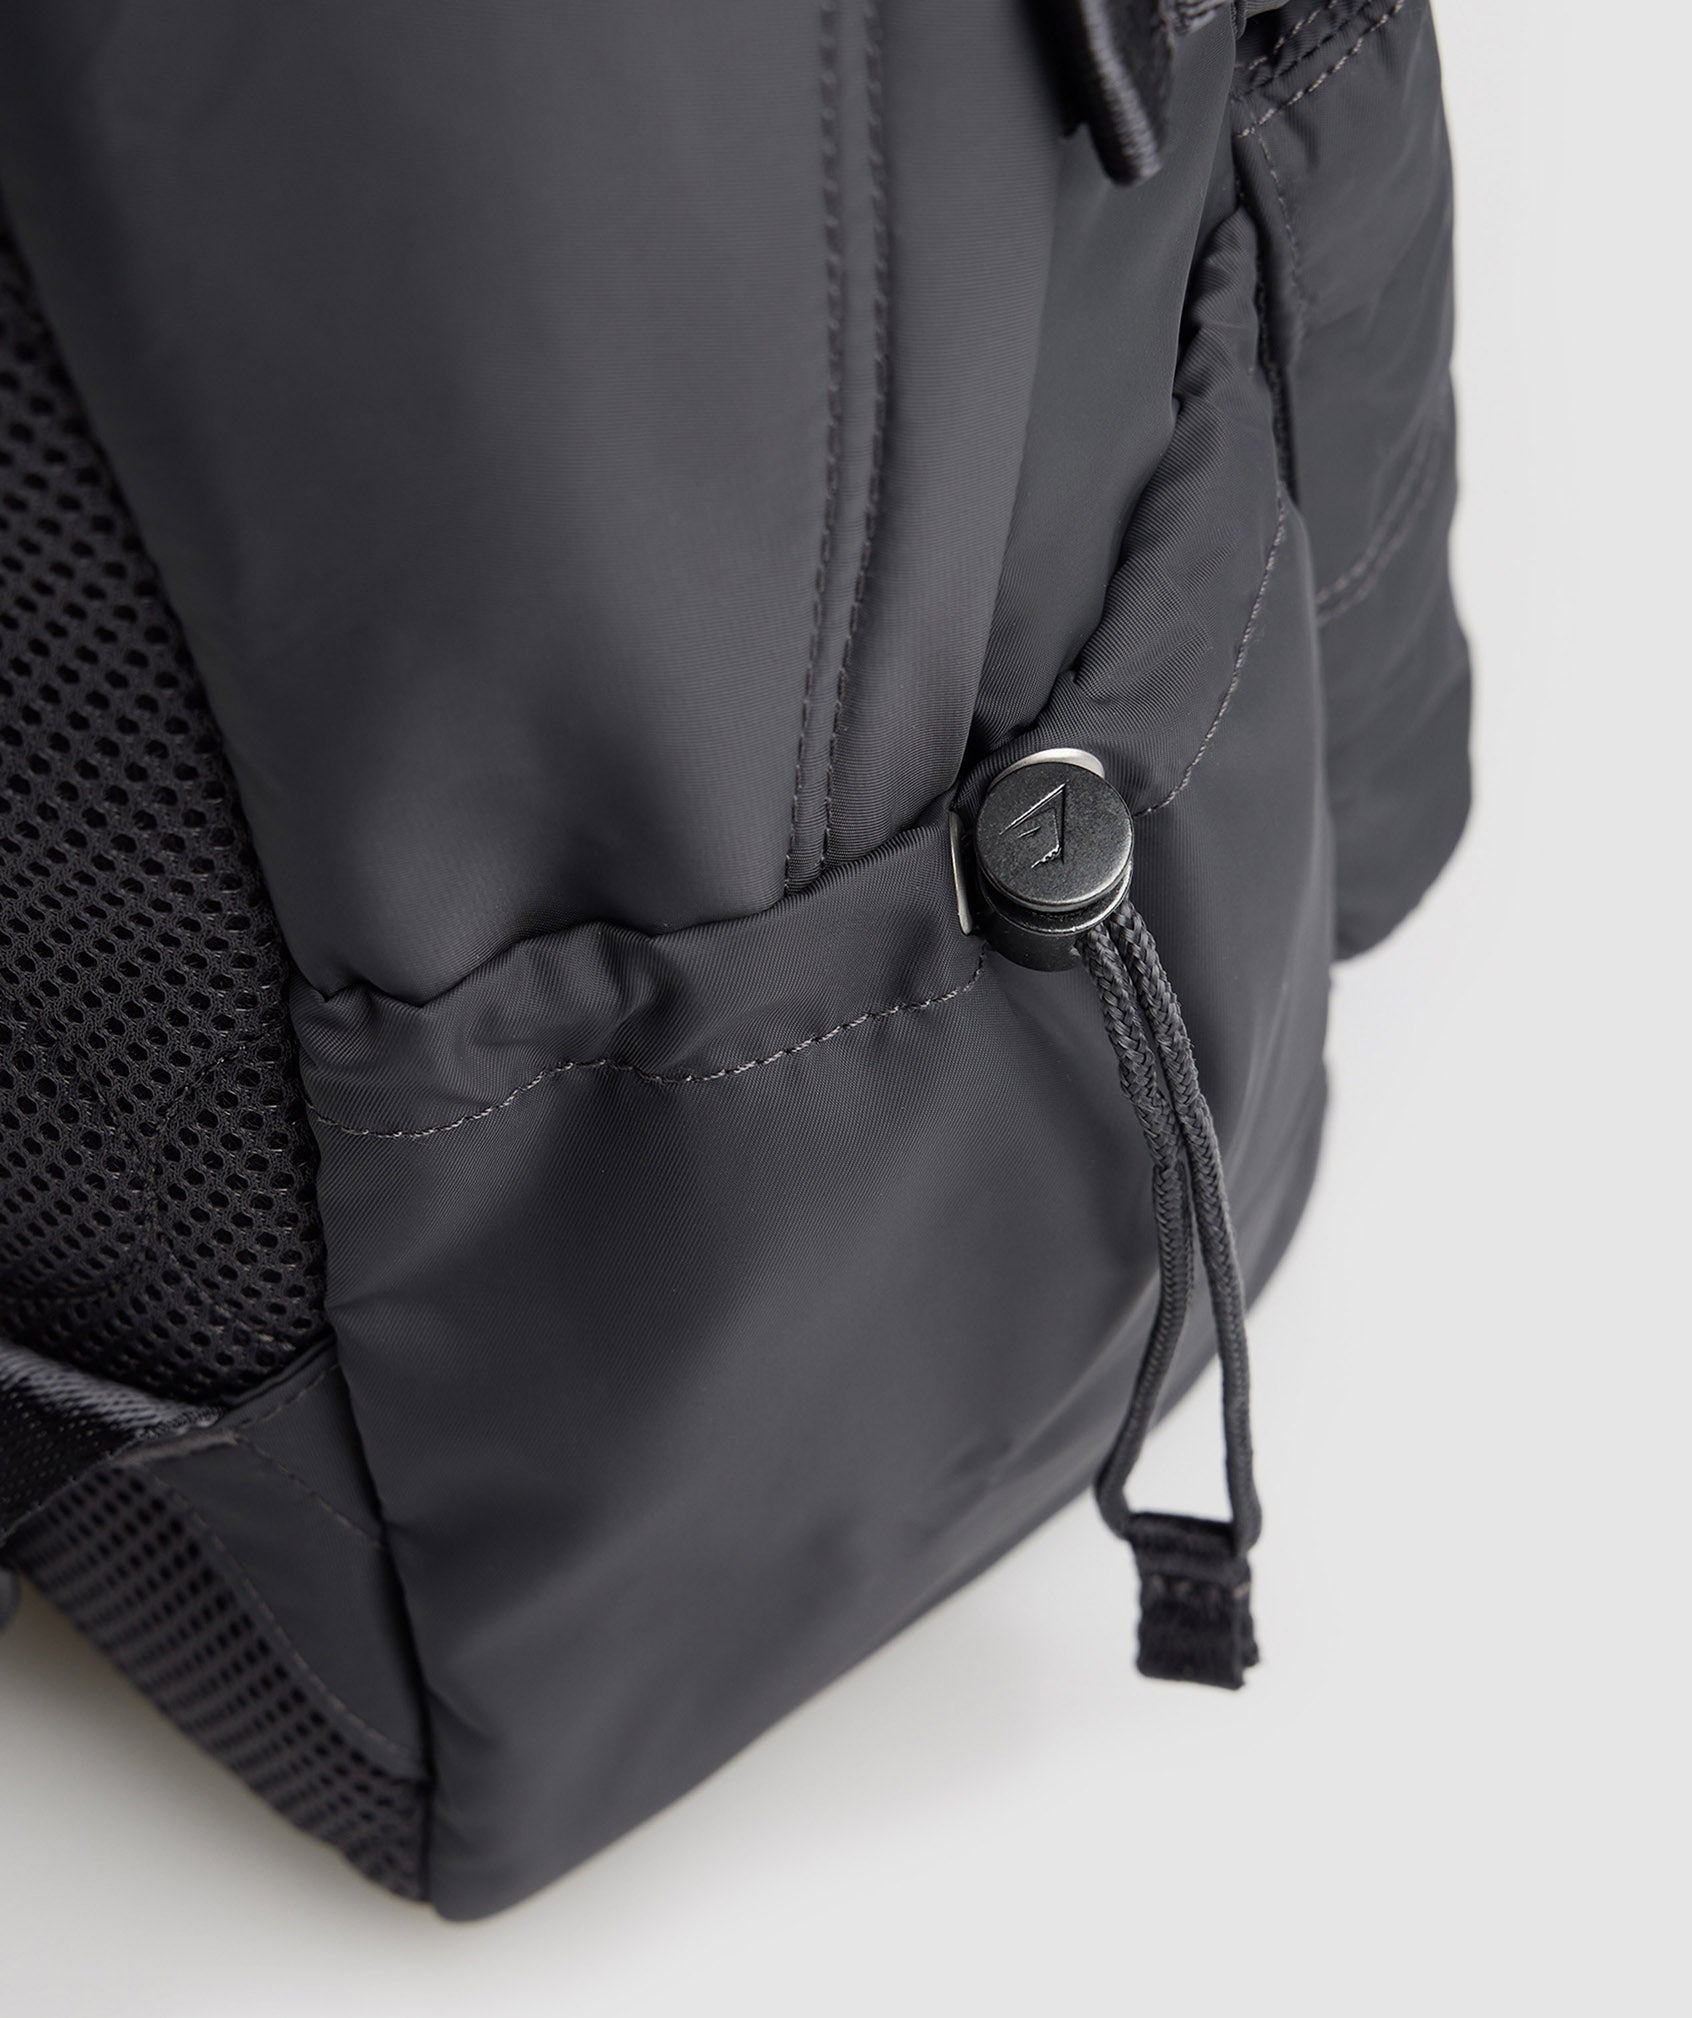 Premium Lifestyle Backpack in Onyx Grey